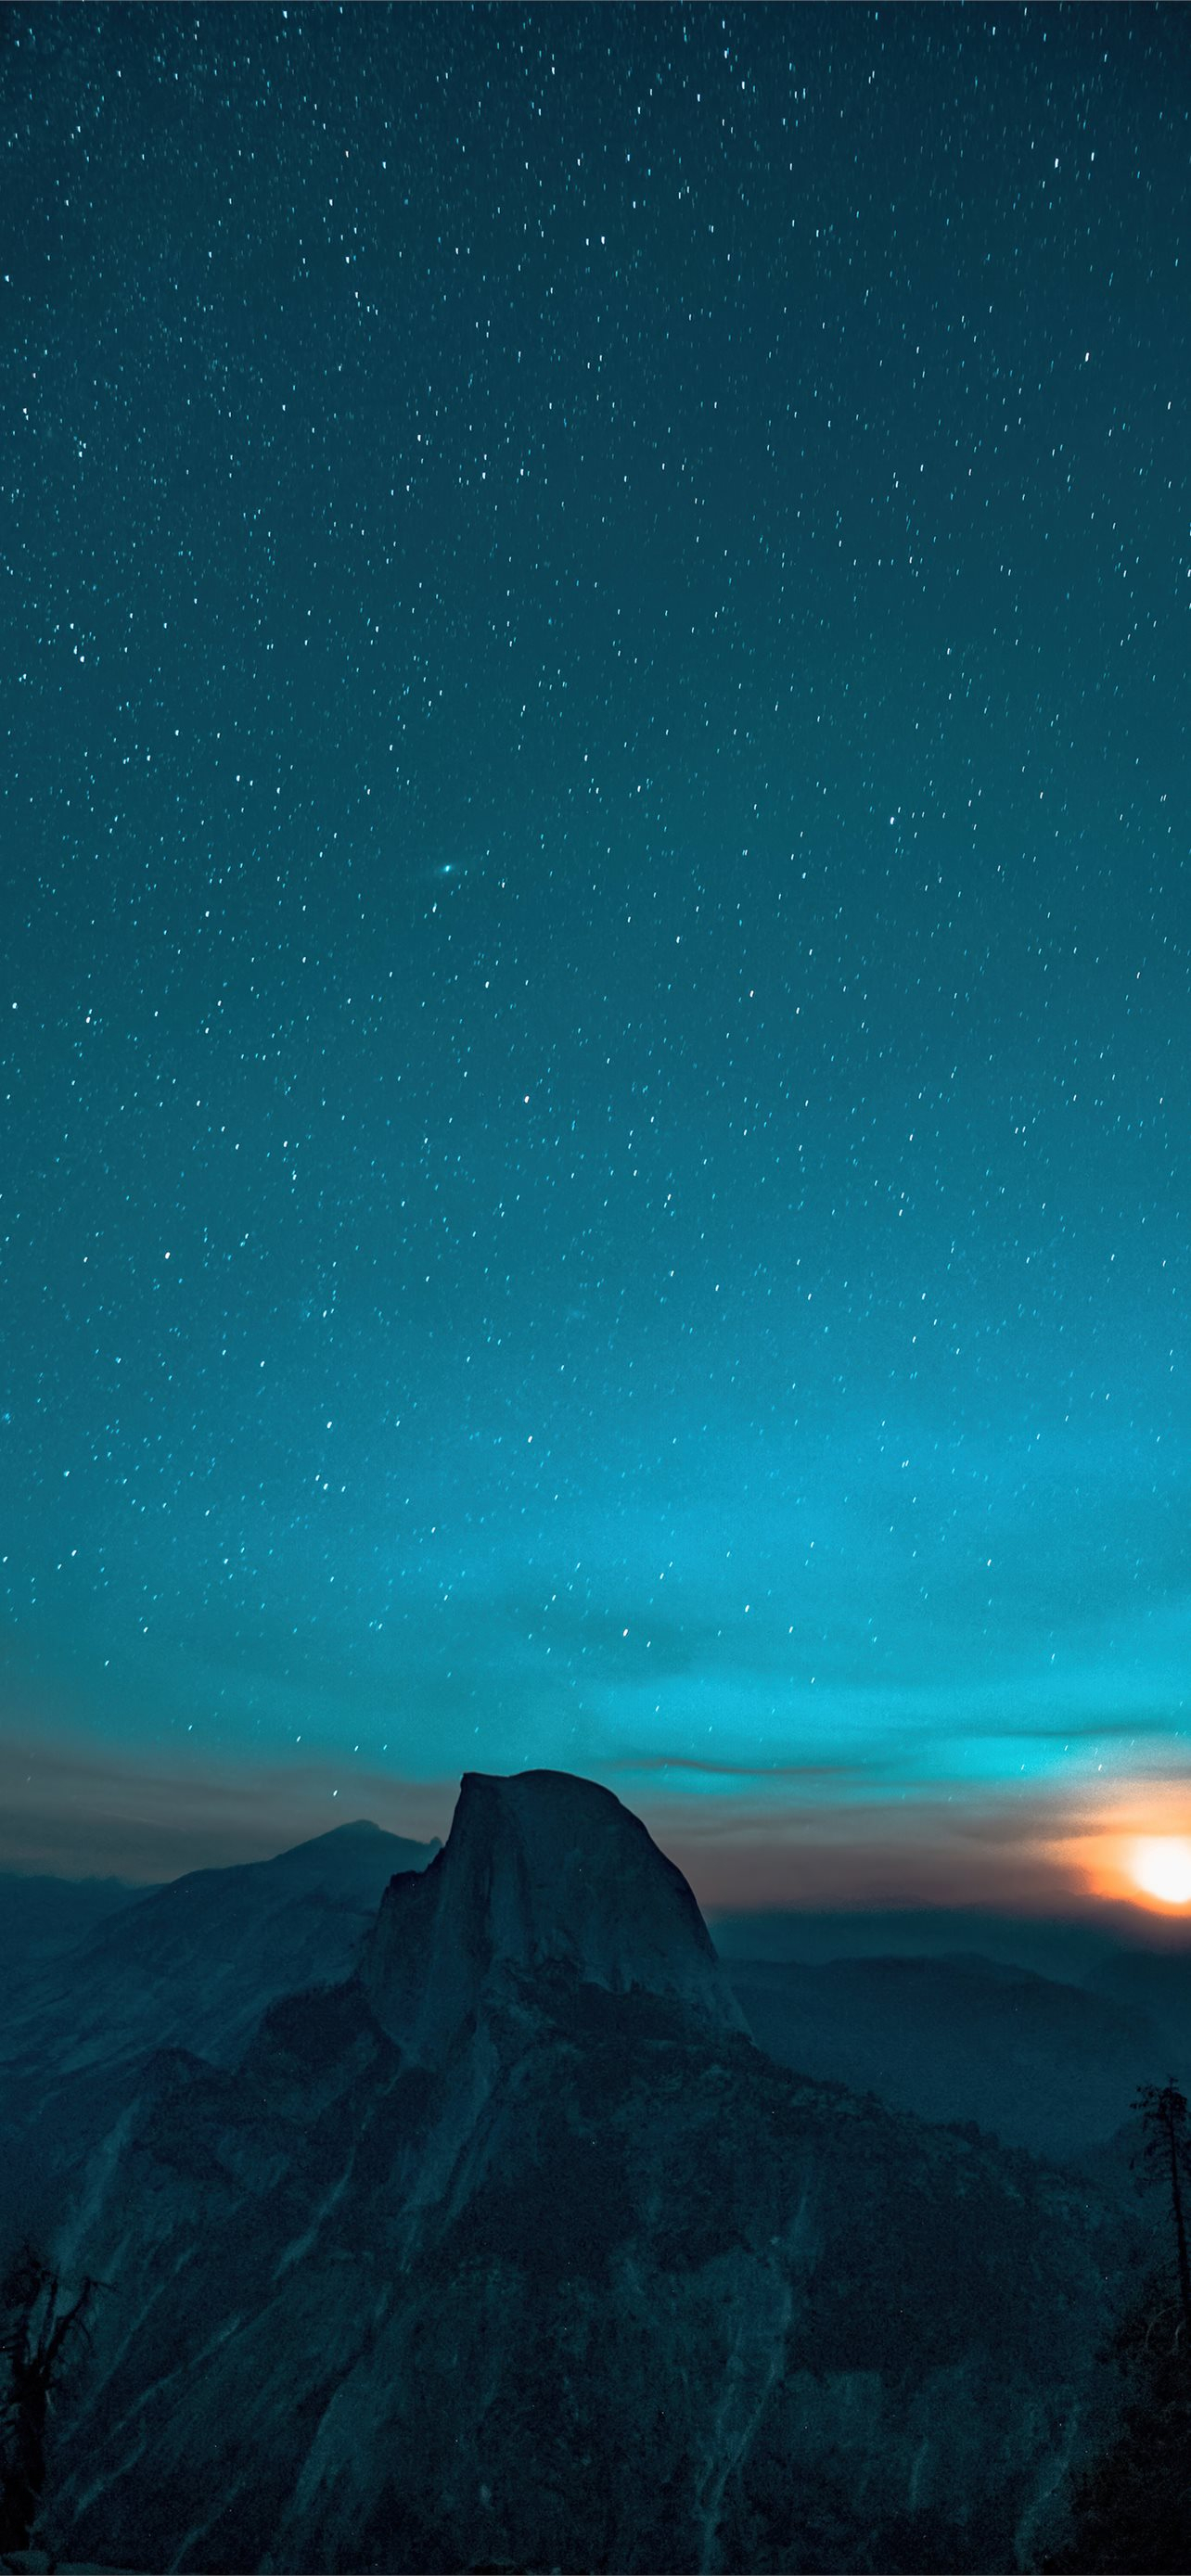 1284x2778 gray mountains sky full of stars 5k iPhone 12 Wallpapers Free Download